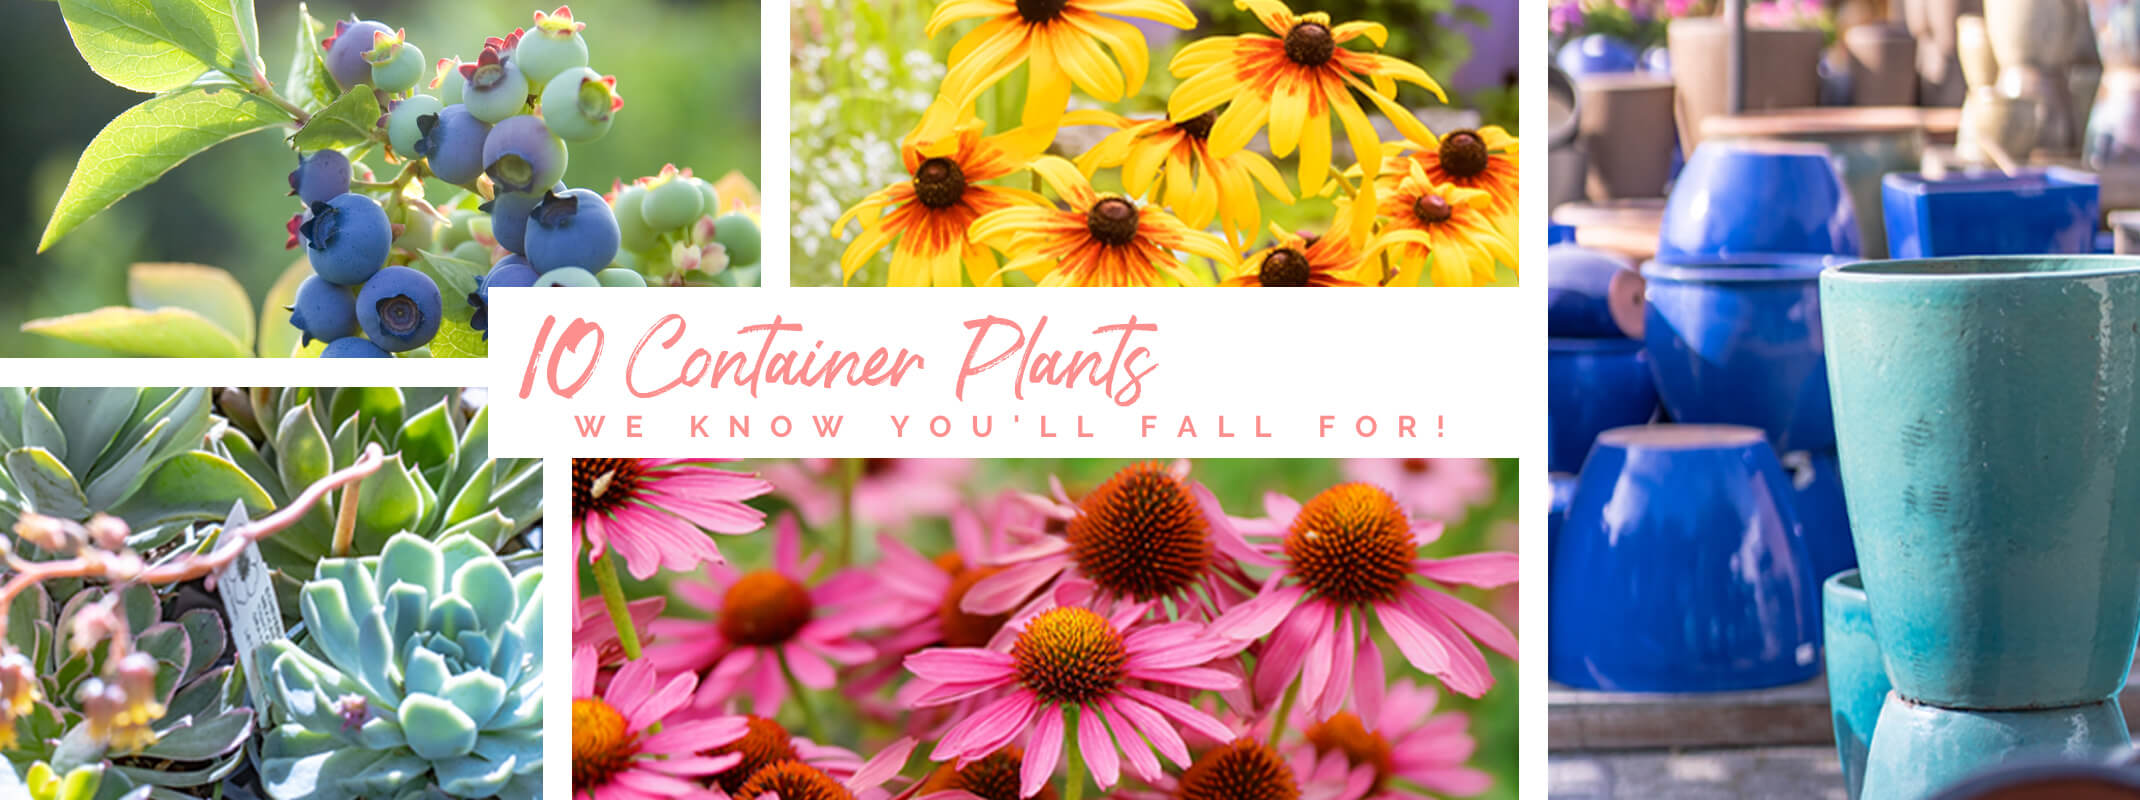 10 fall container plants we know you'll fall for banner